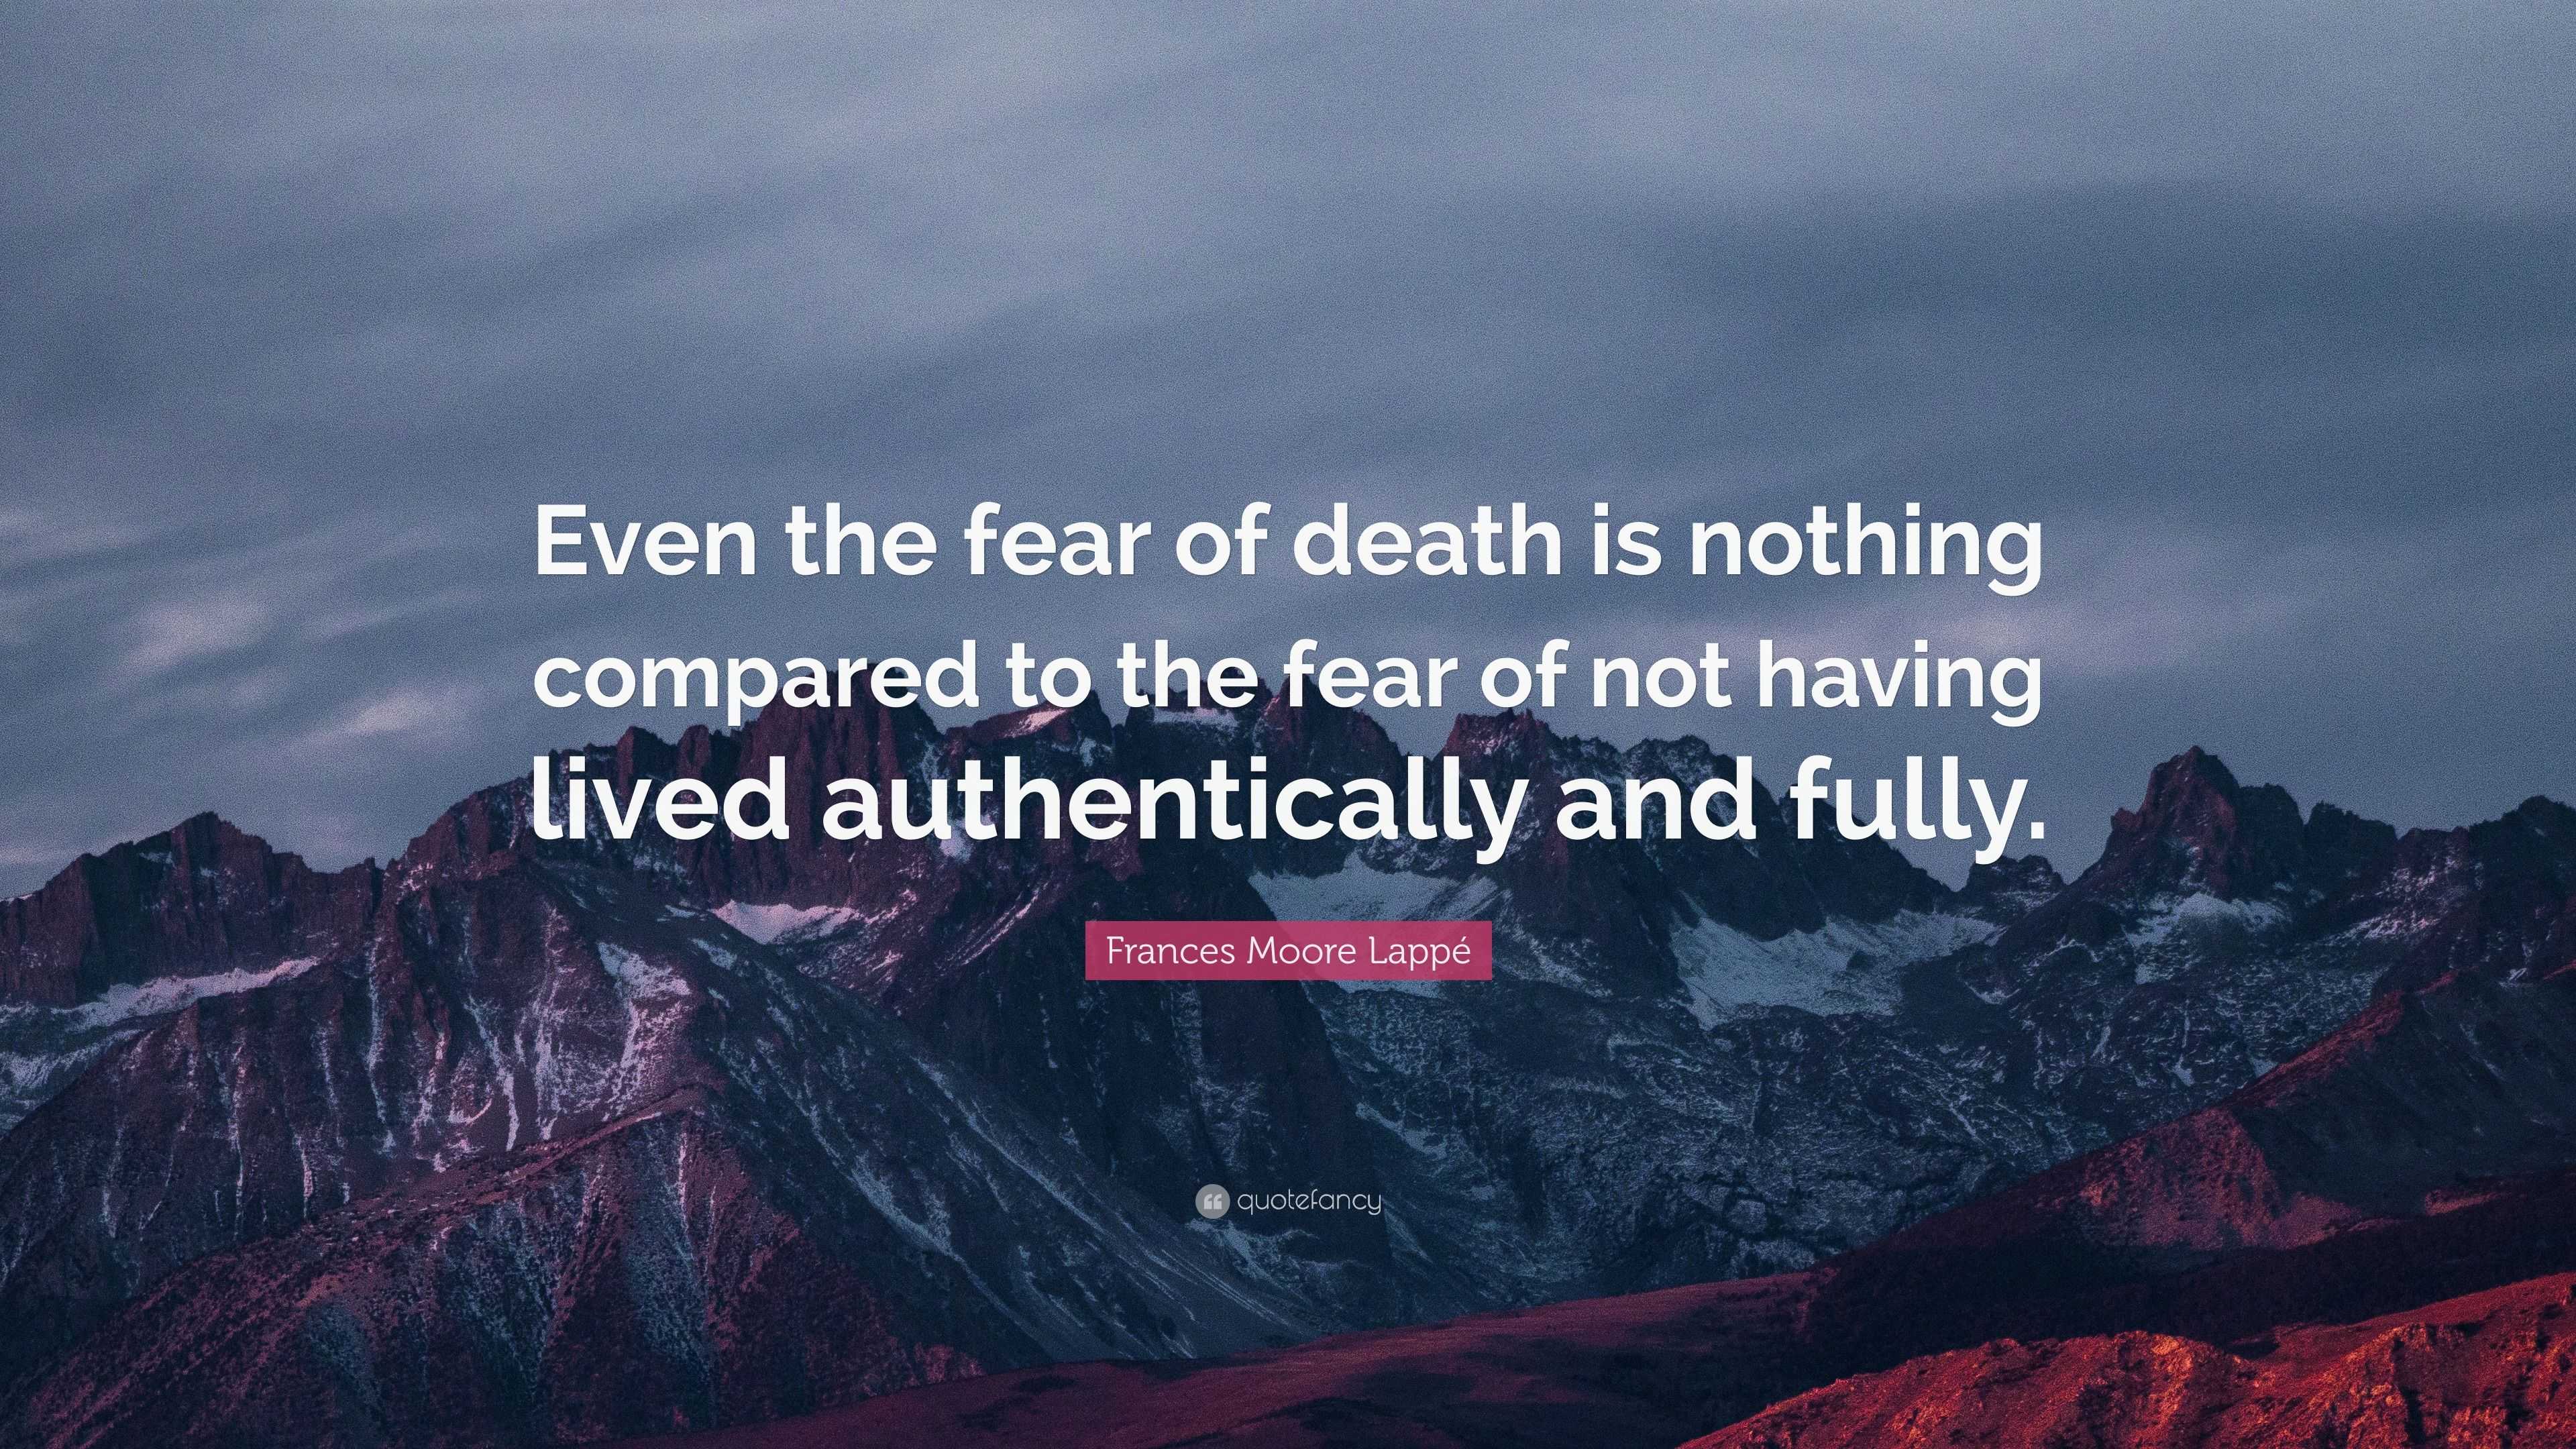 Frances Moore Lappé Quote: “Even the fear of death is nothing compared ...